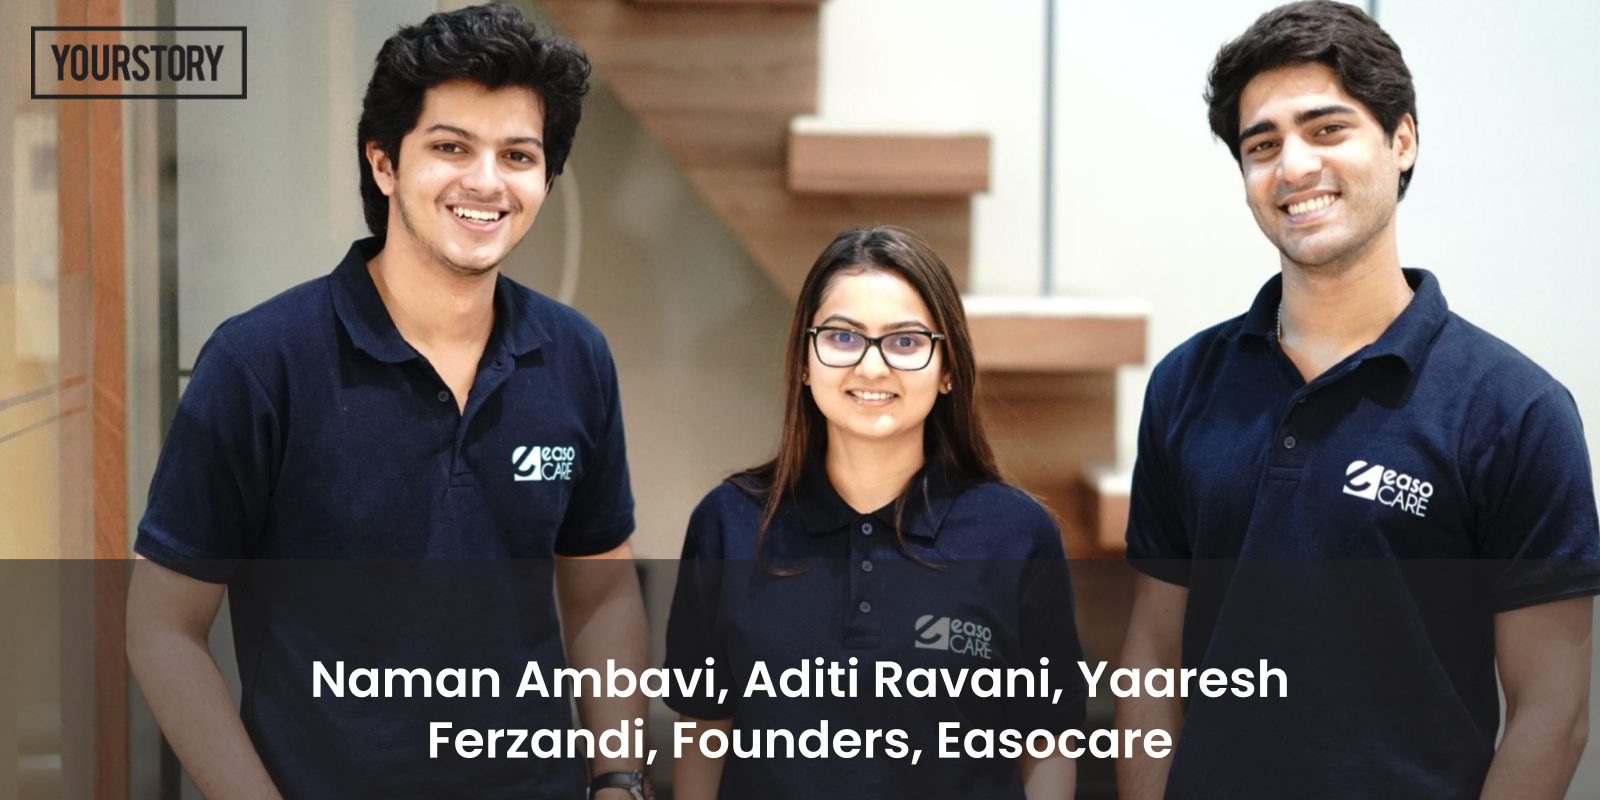 This Mumbai-based healthtech SaaS startup is enabling offline medical stores to convert online